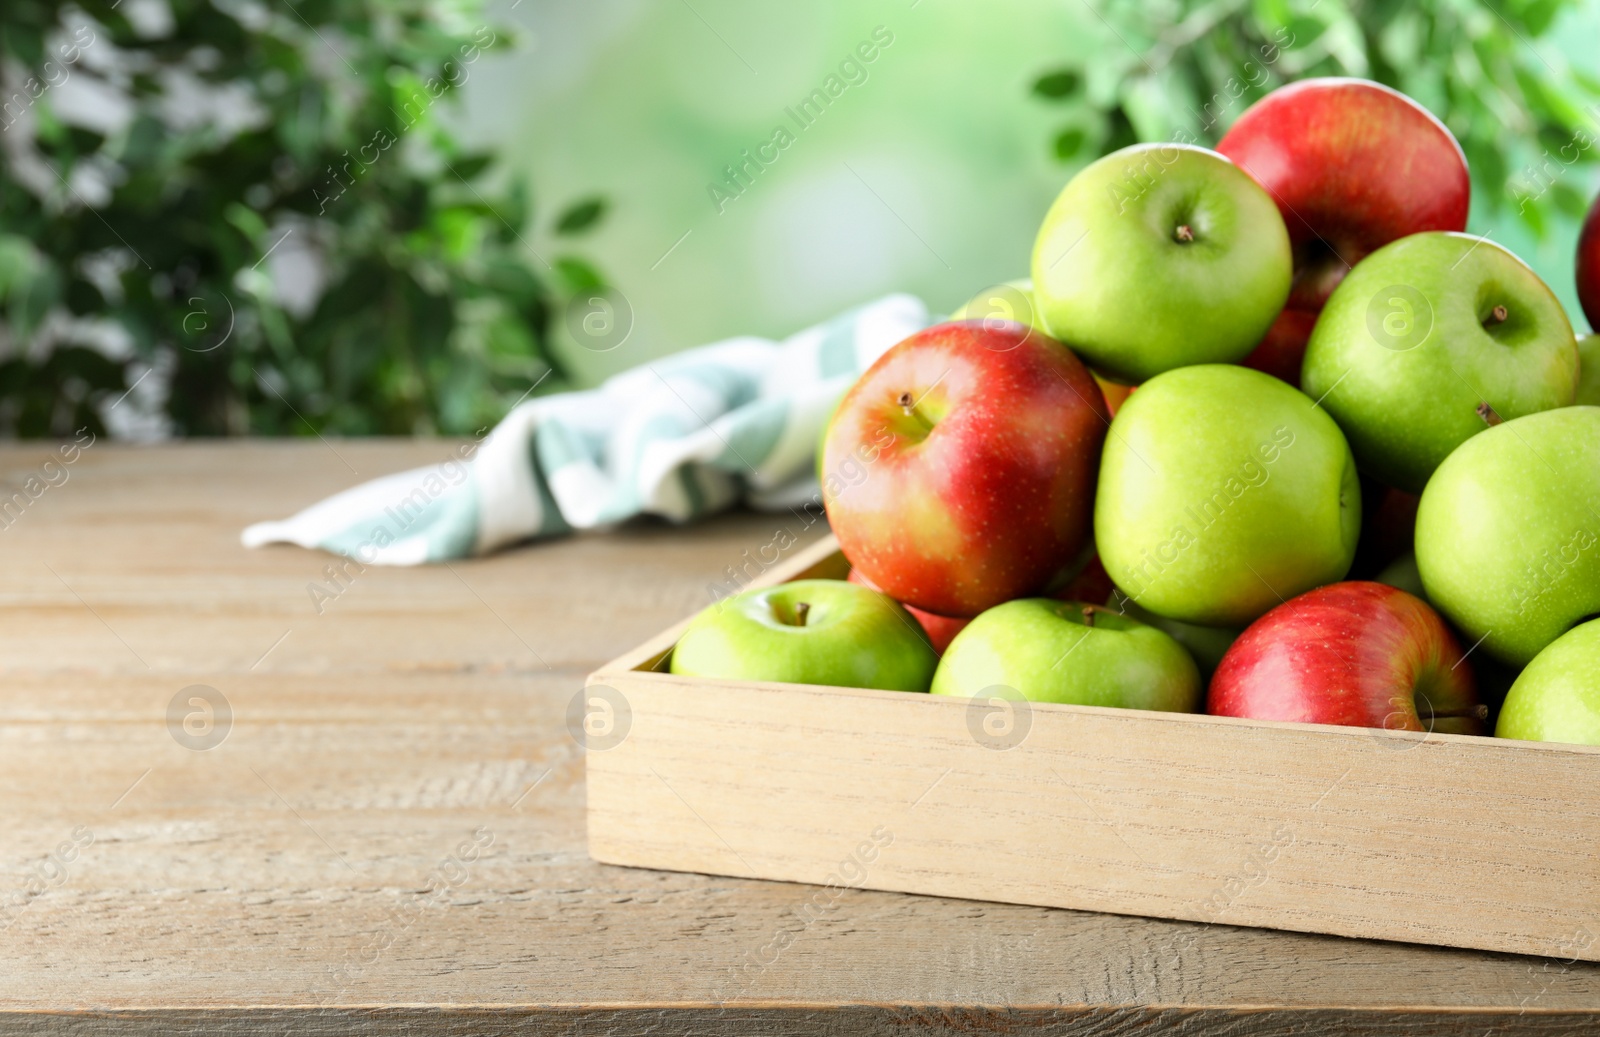 Photo of Ripe apples on wooden table against blurred background. Space for text